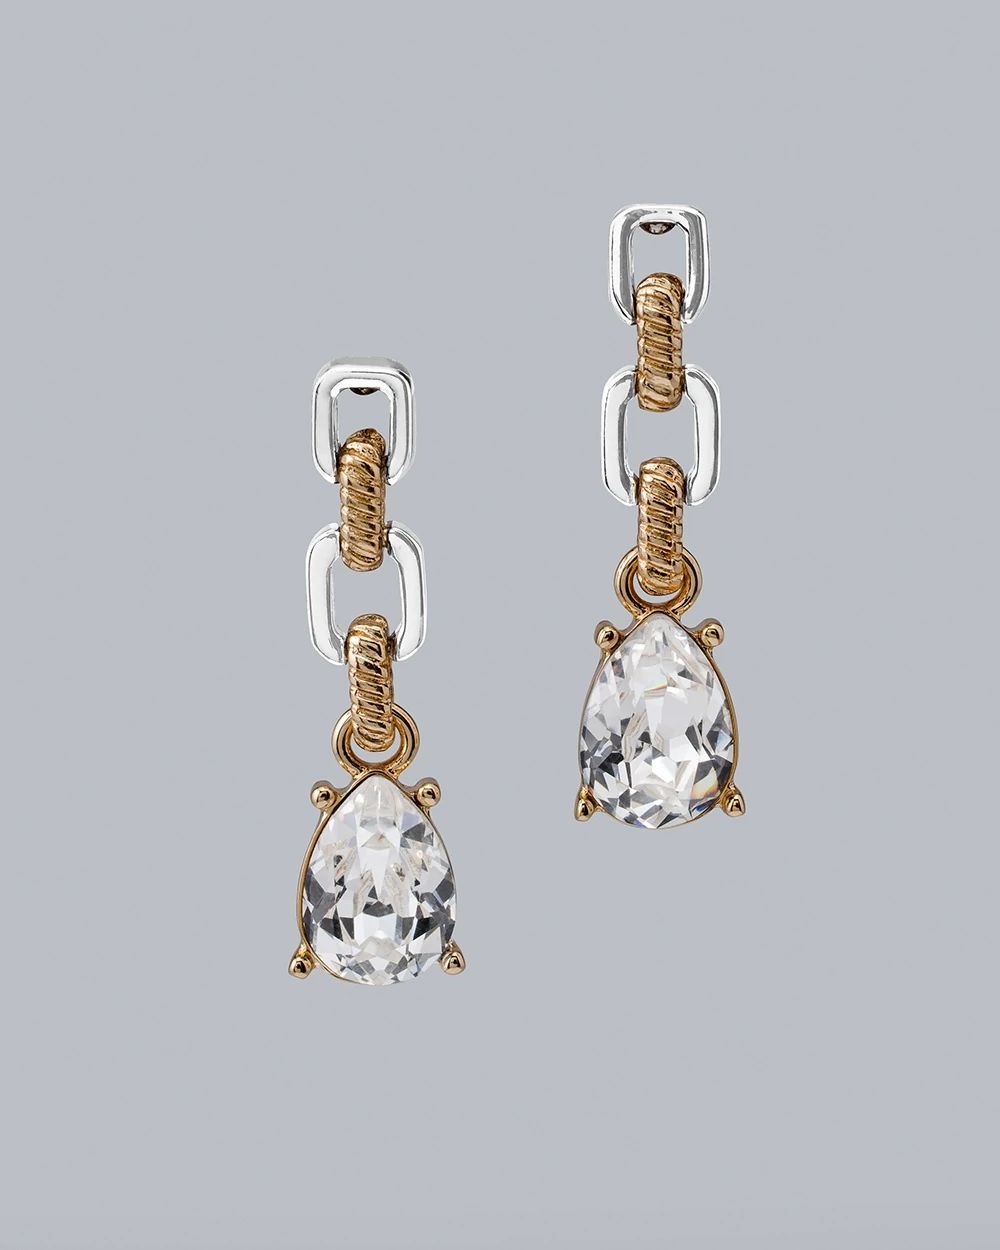 Mixed Metal Drop Earrings With Crystals From Swarovski®